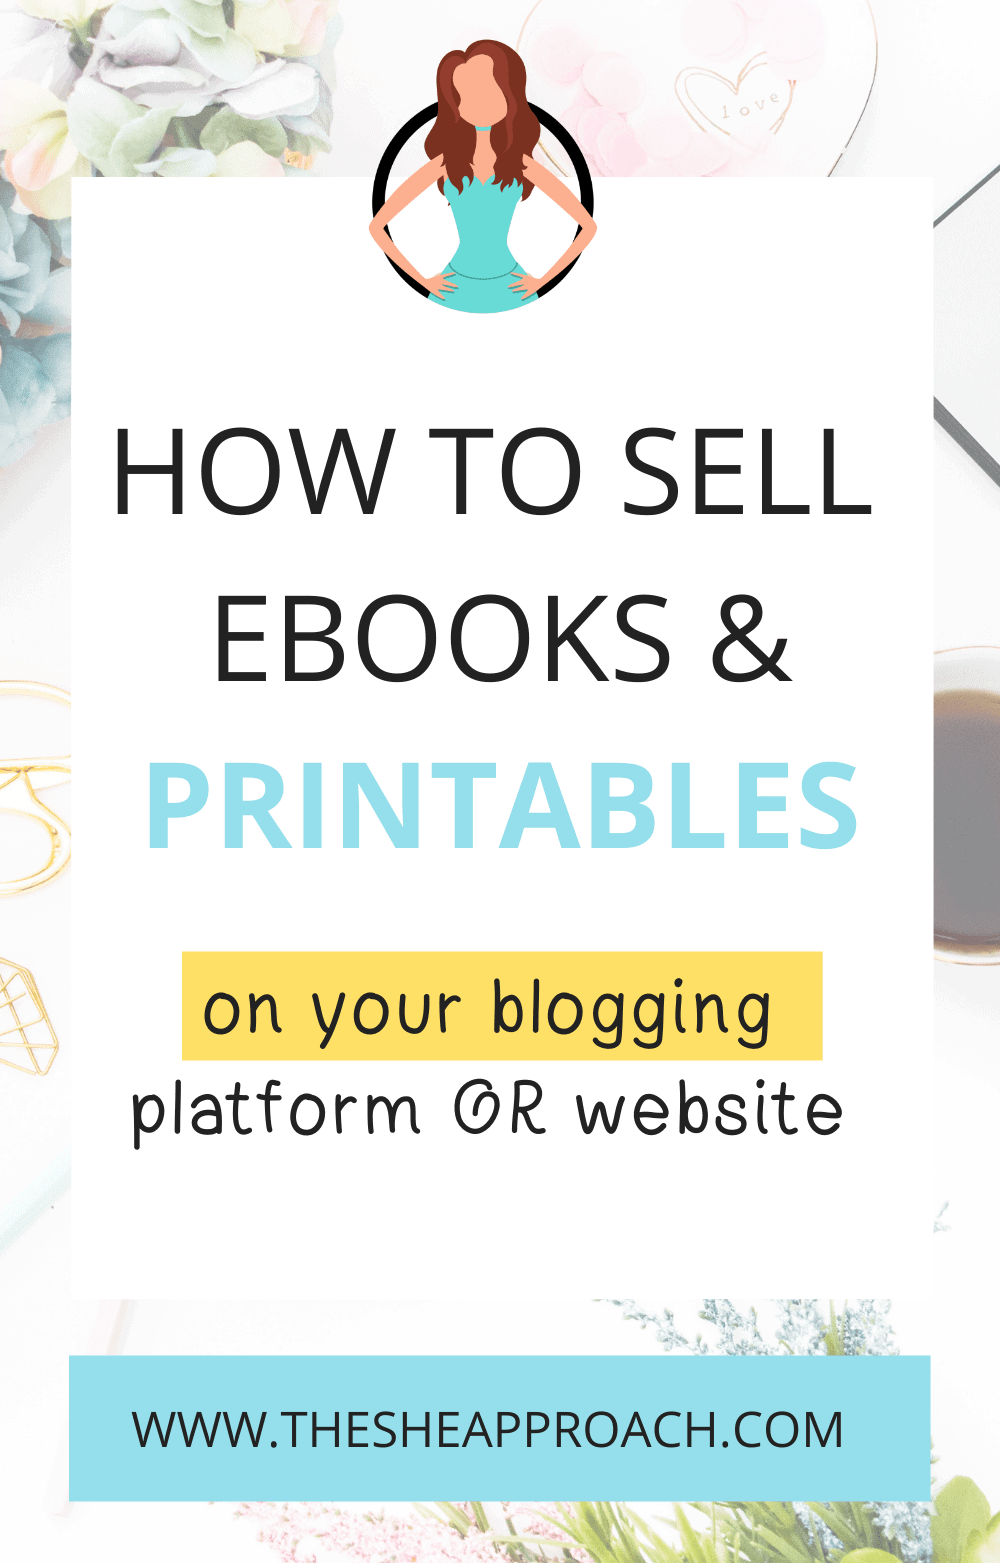 How To Sell Ebooks And Printables On Your WordPress Blog With Send Owl